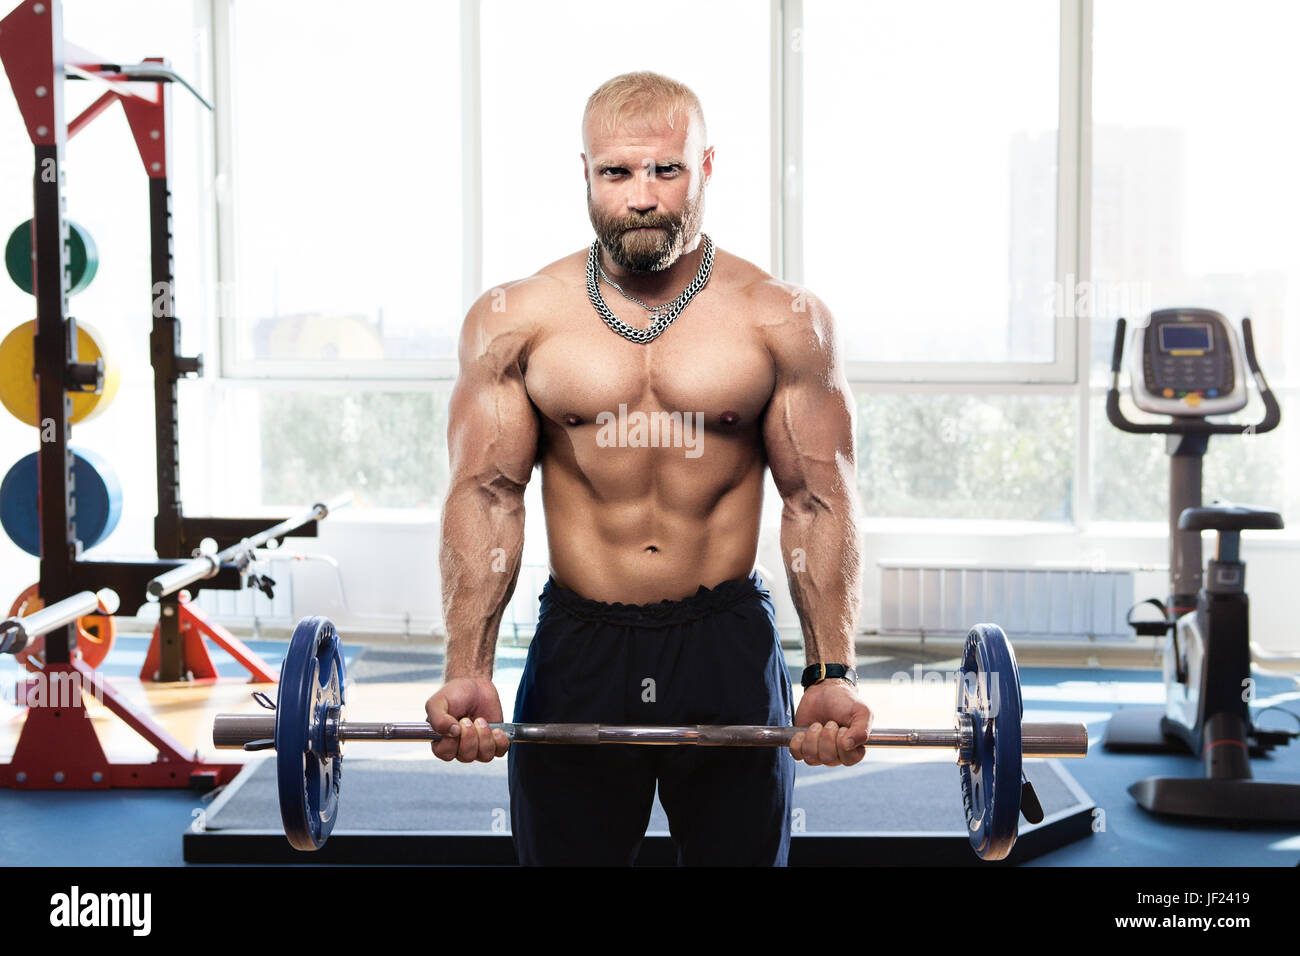 bodybuilder in the gym training with bar Stock Photo